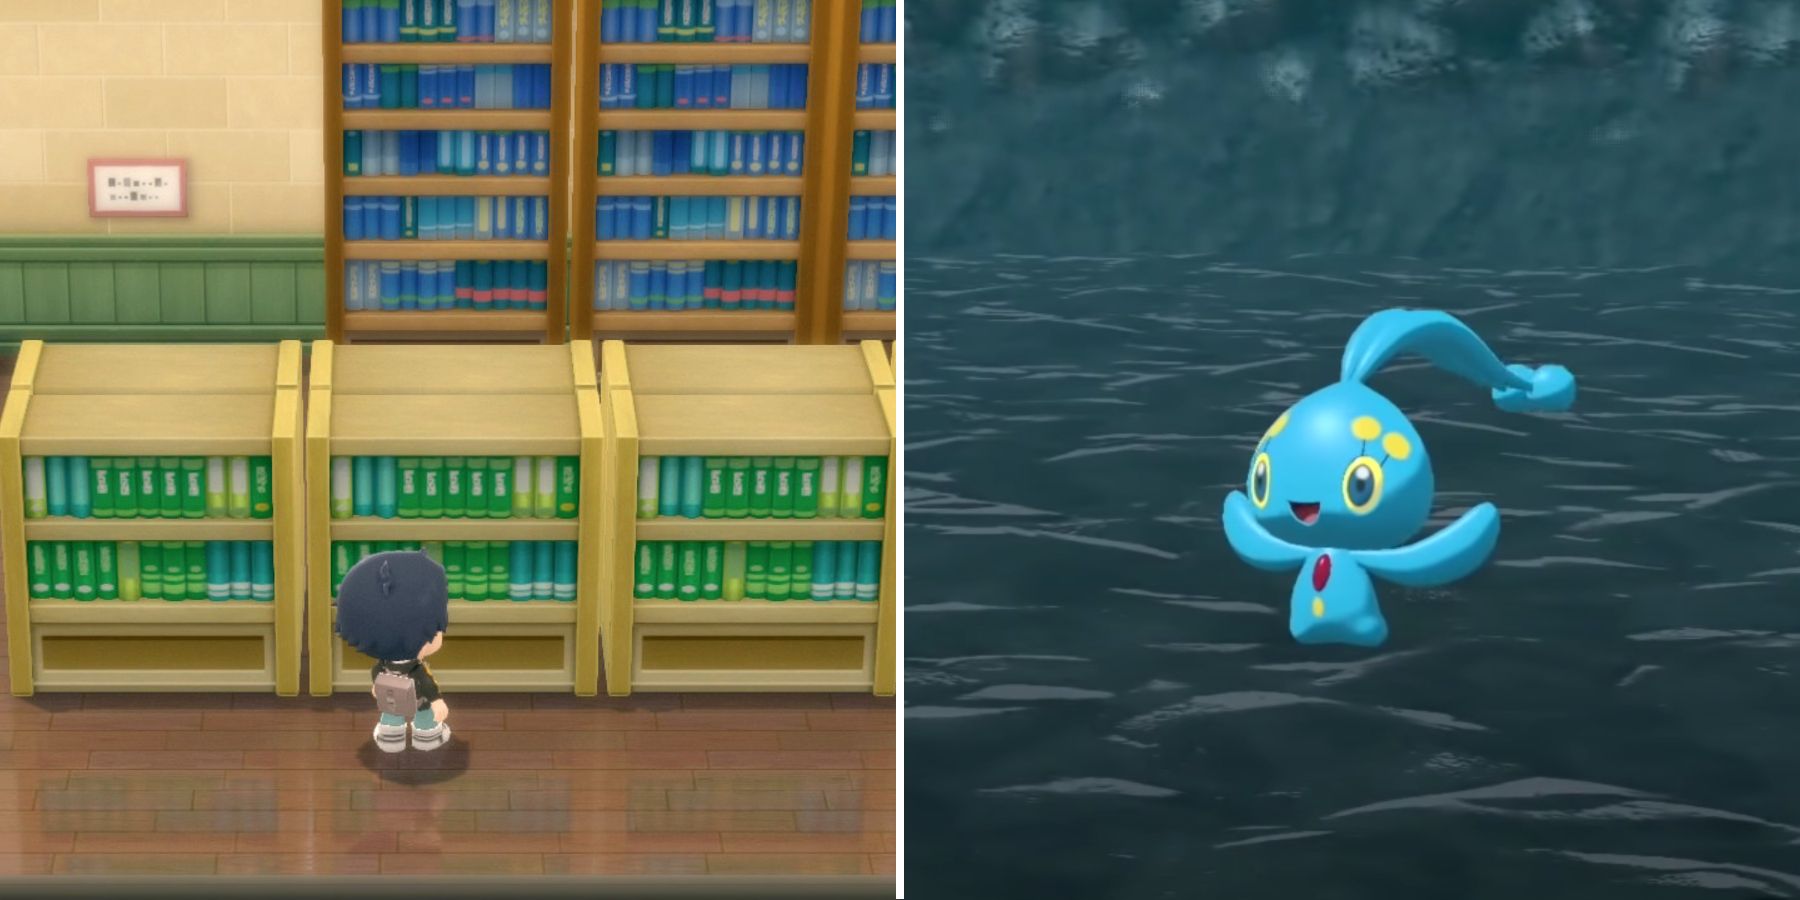 Pokemon BDSP's Canalave Library tells the Sea's Legend from Pokemon Legends: Arceus